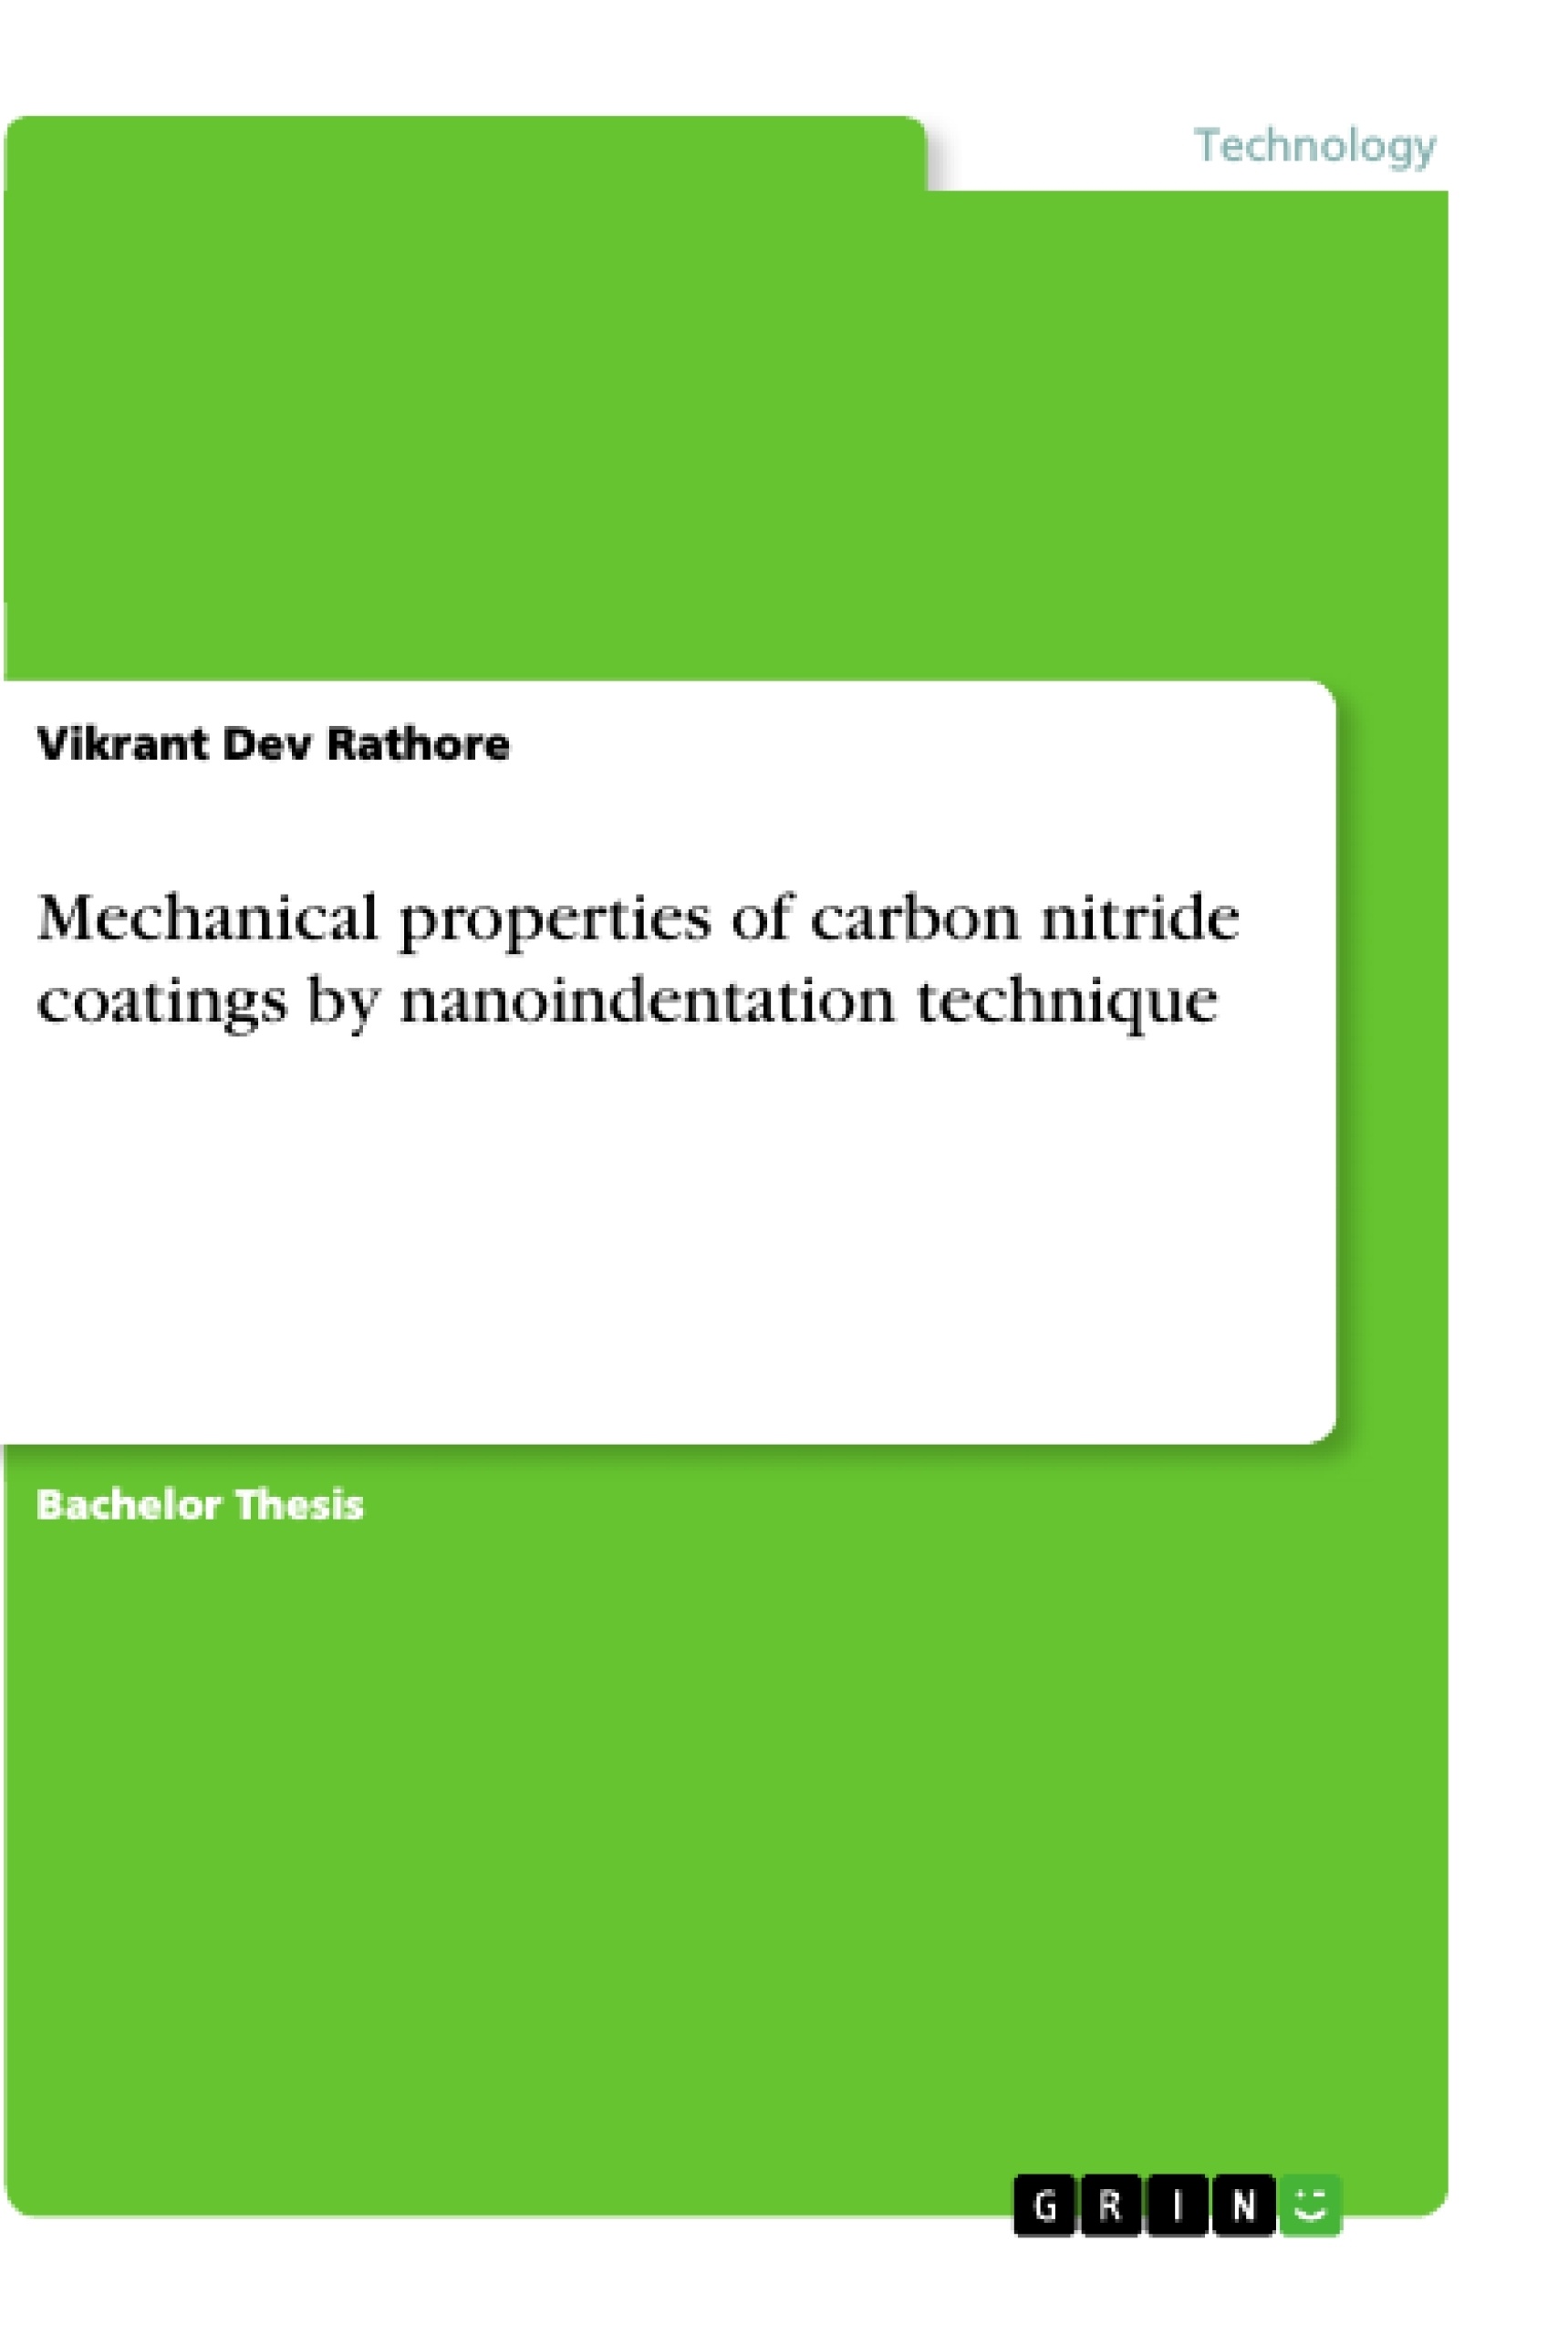 Title: Mechanical properties of carbon nitride coatings by nanoindentation technique